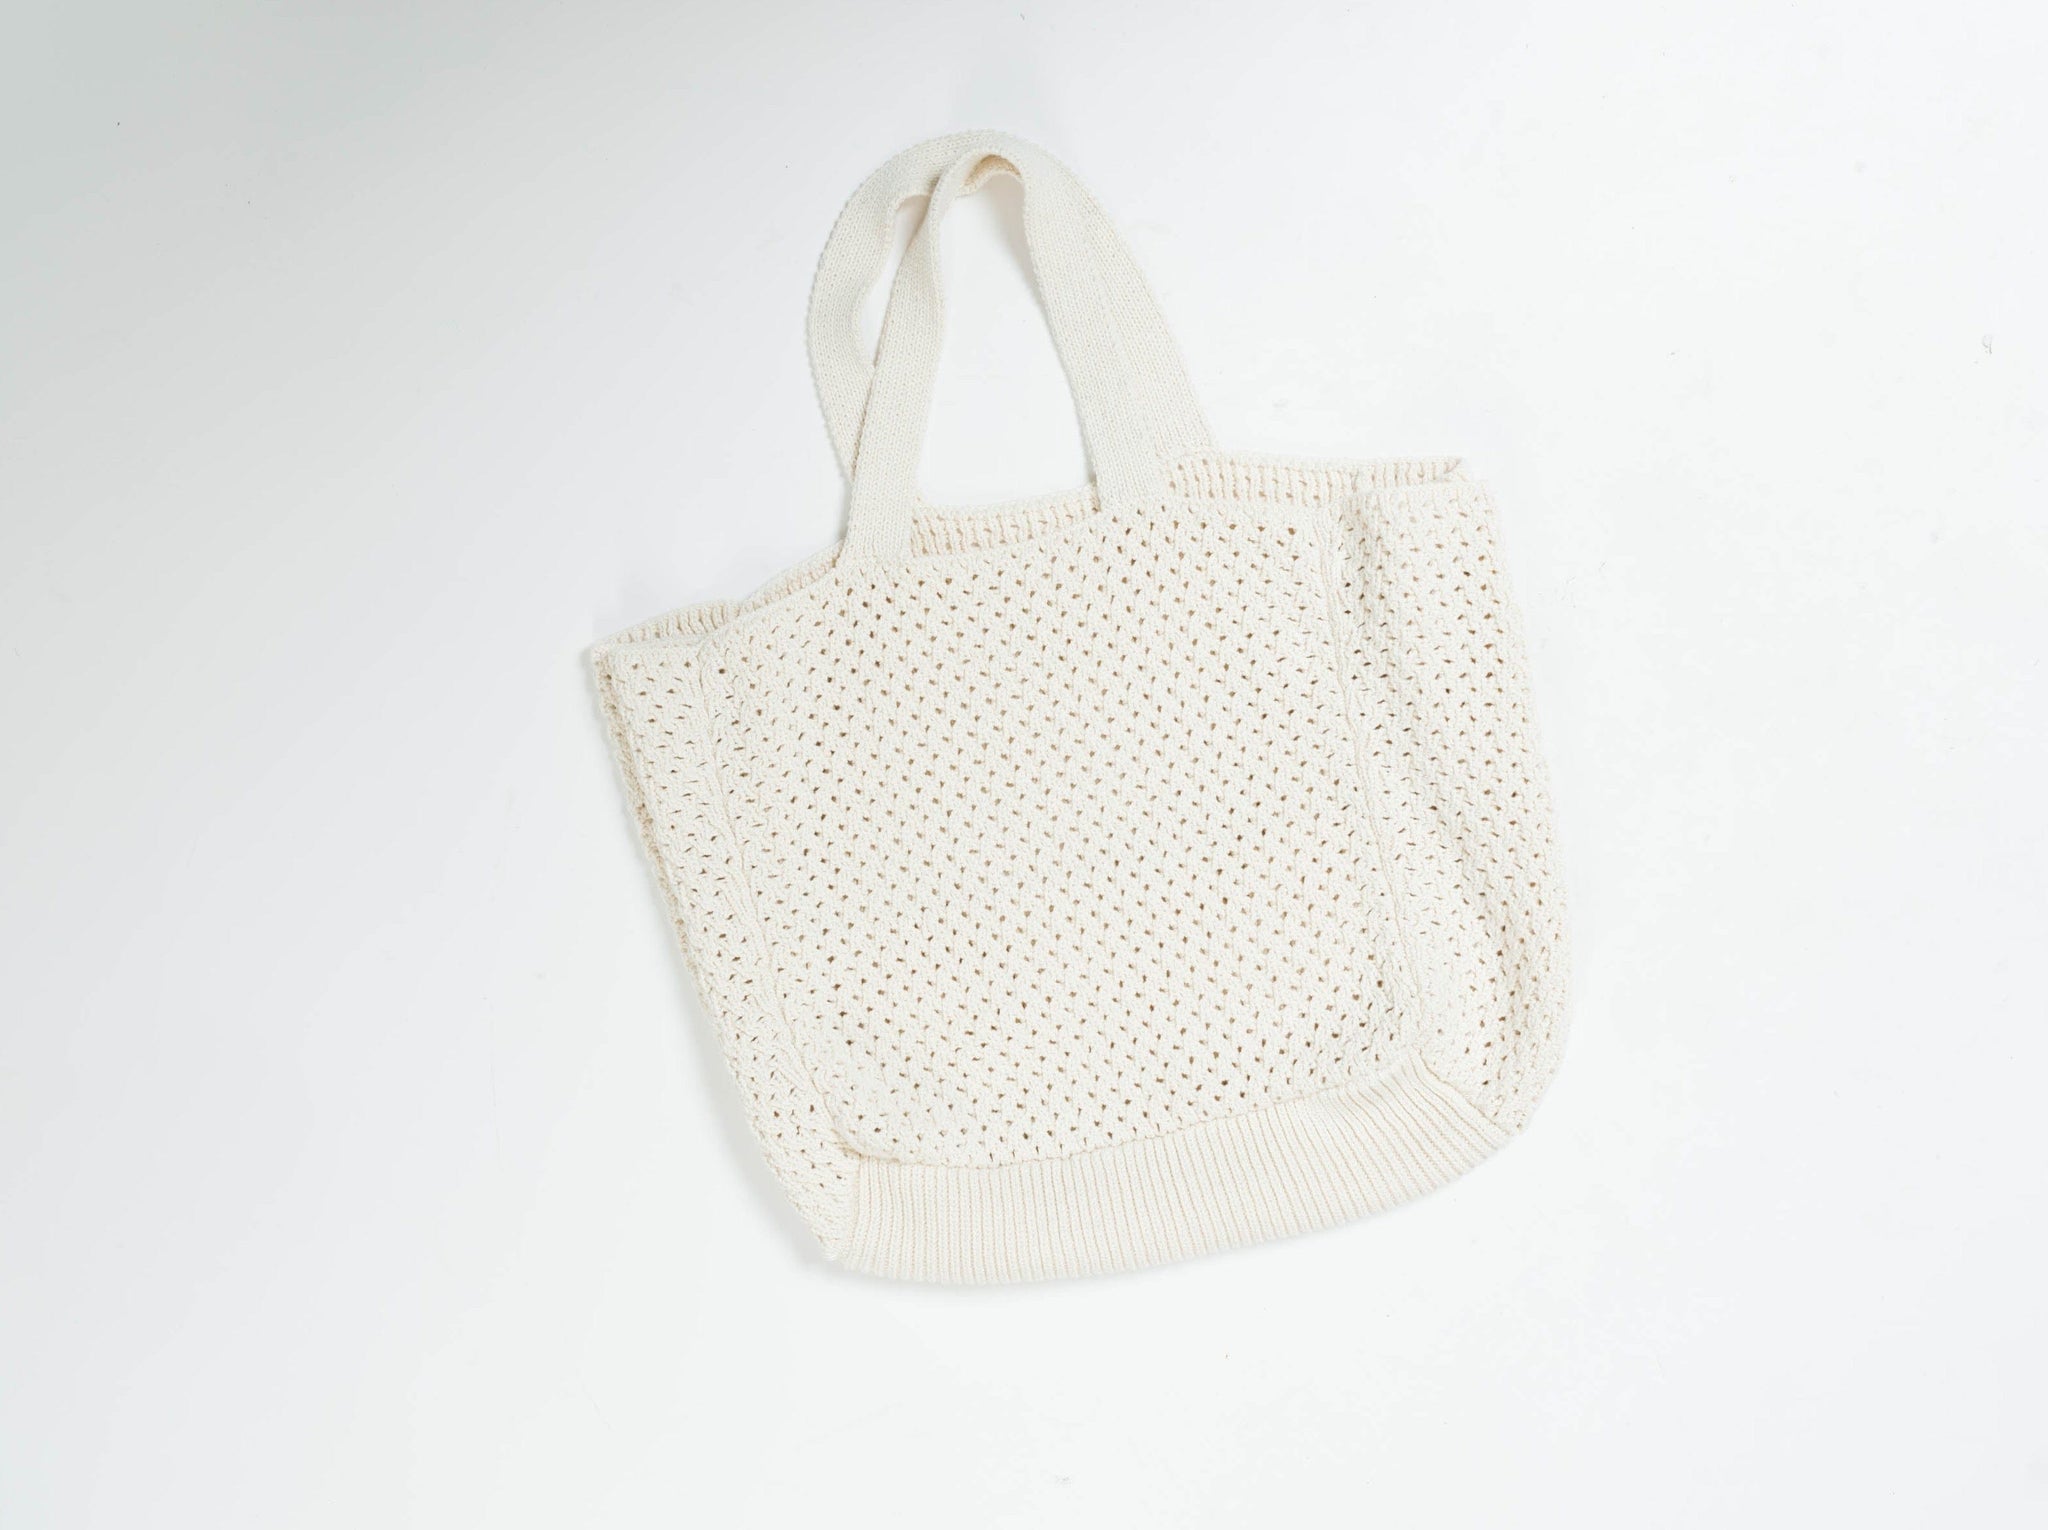 Handmade in Peru, Crochet Slouchy Tote - Ivory on a plain background.